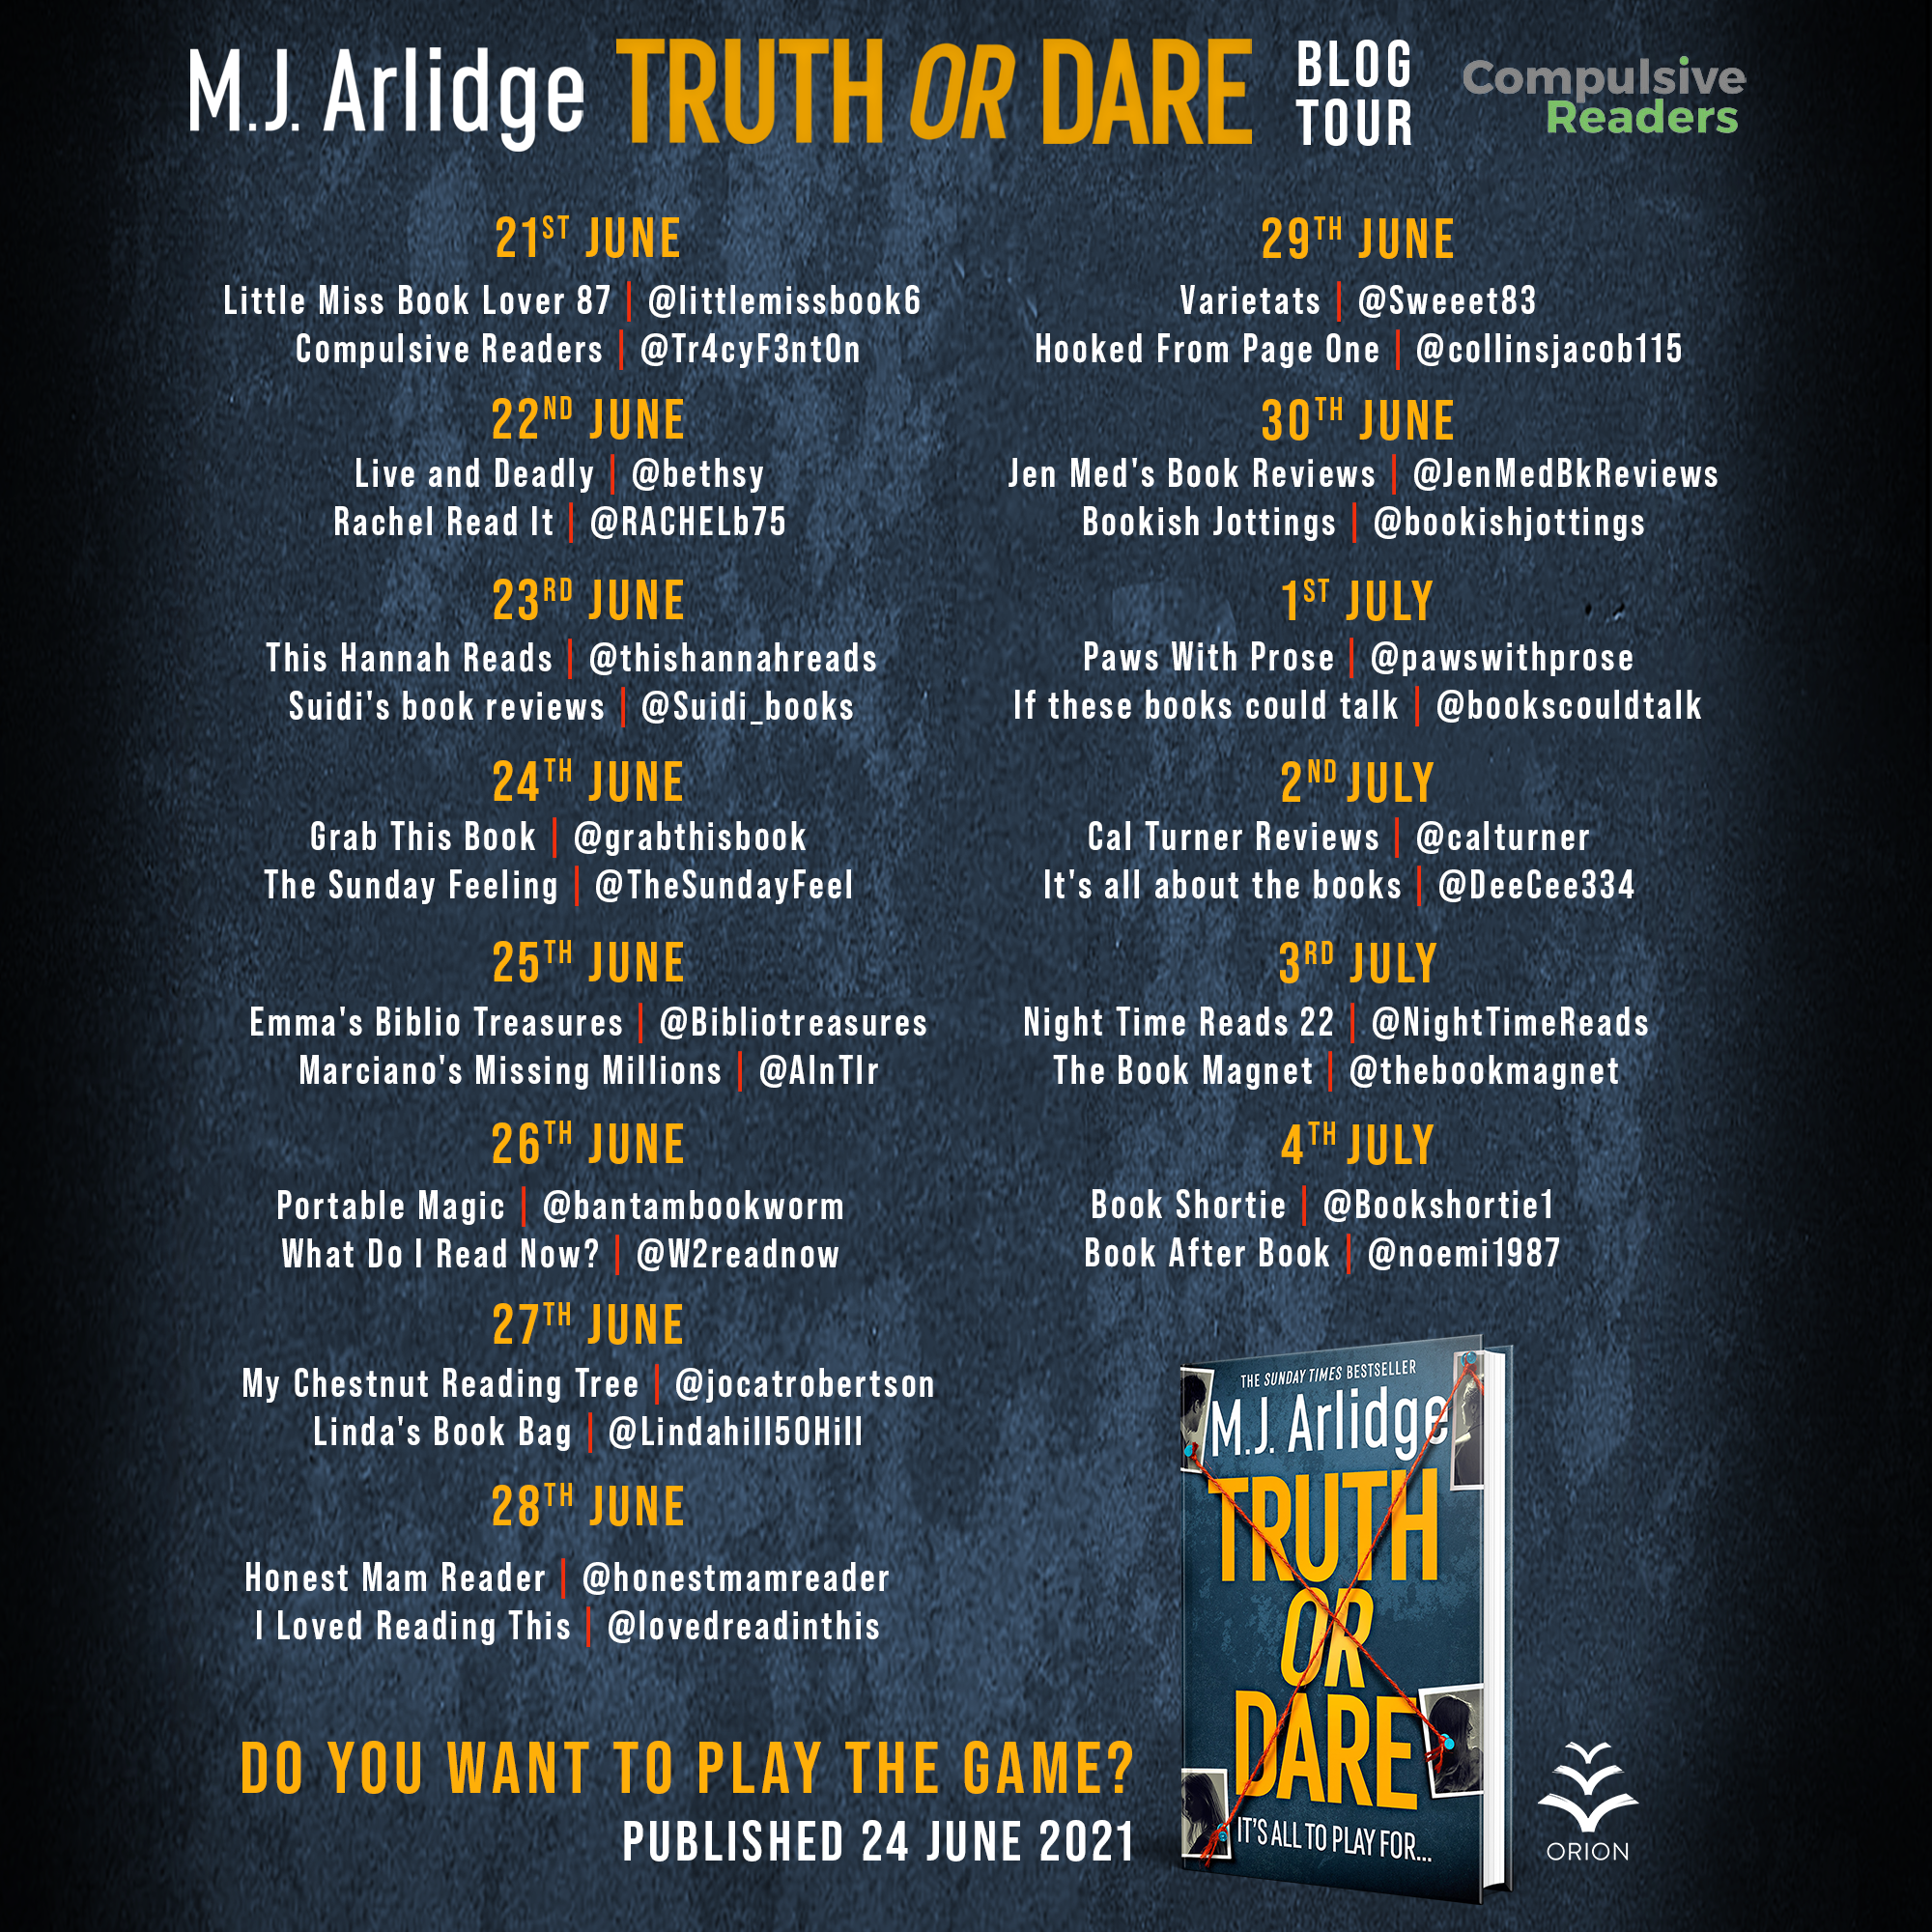 TRUTH OR DARE BLOG TOUR